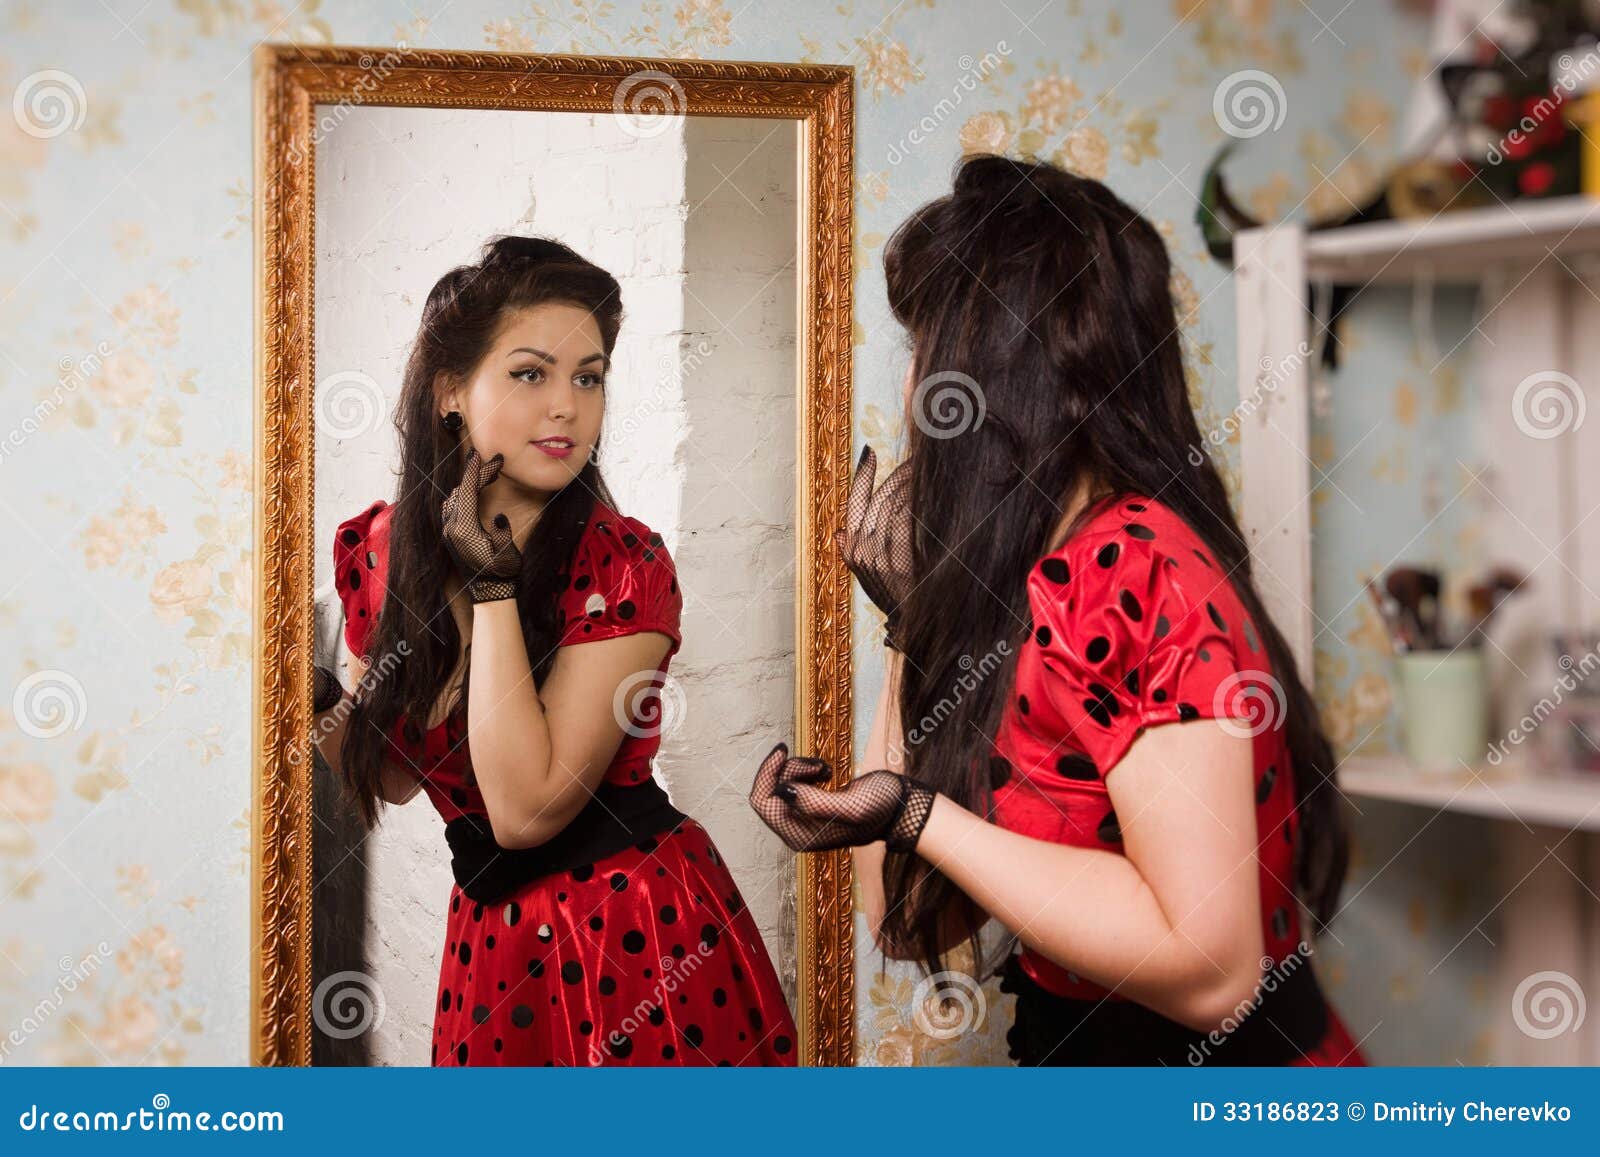 girl in front of mirror